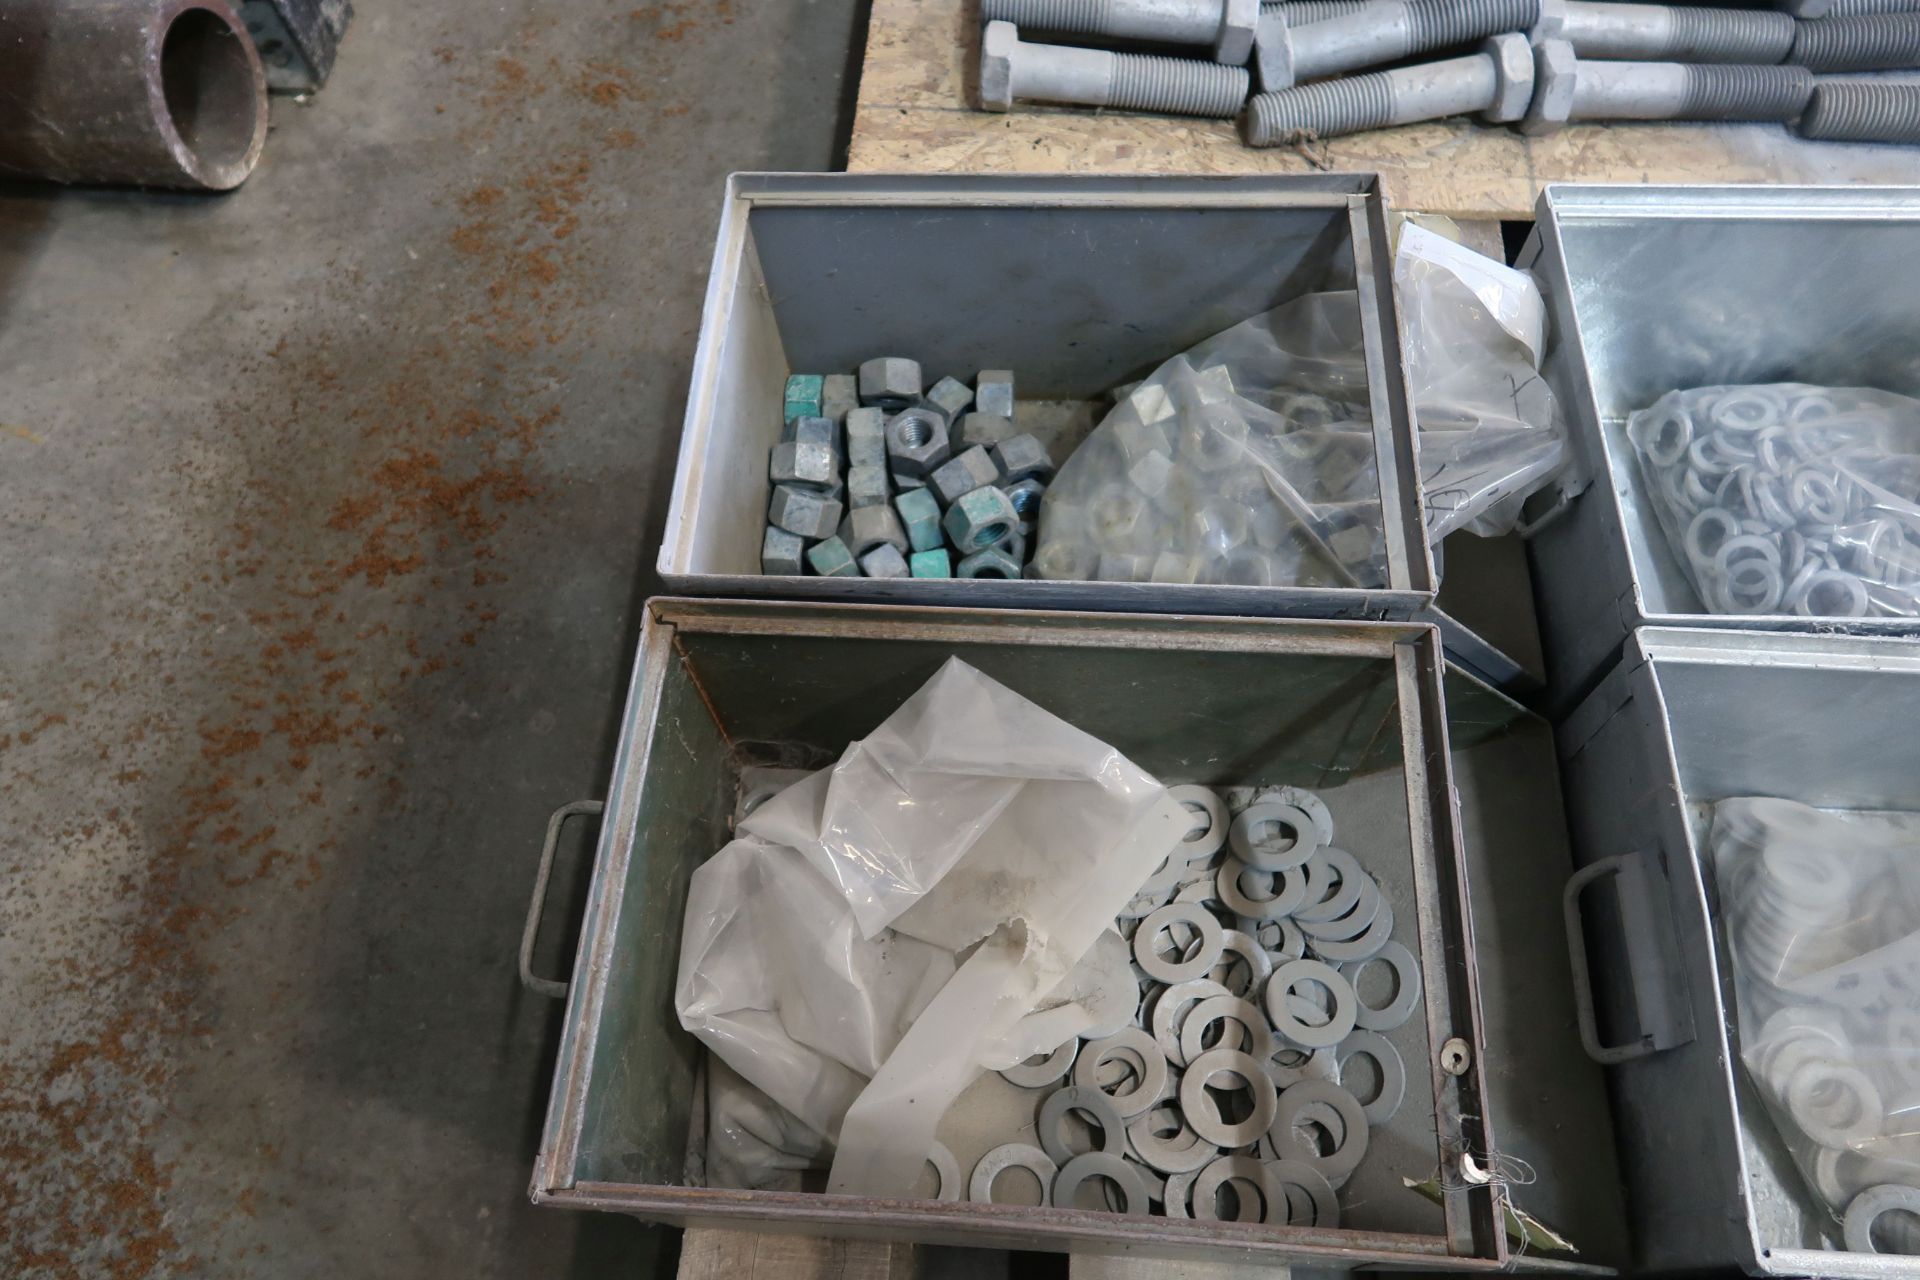 SKID MISCELLANEOUS GALVANIZED TOWER COMPONENTS AND HARDWARE - Image 4 of 4